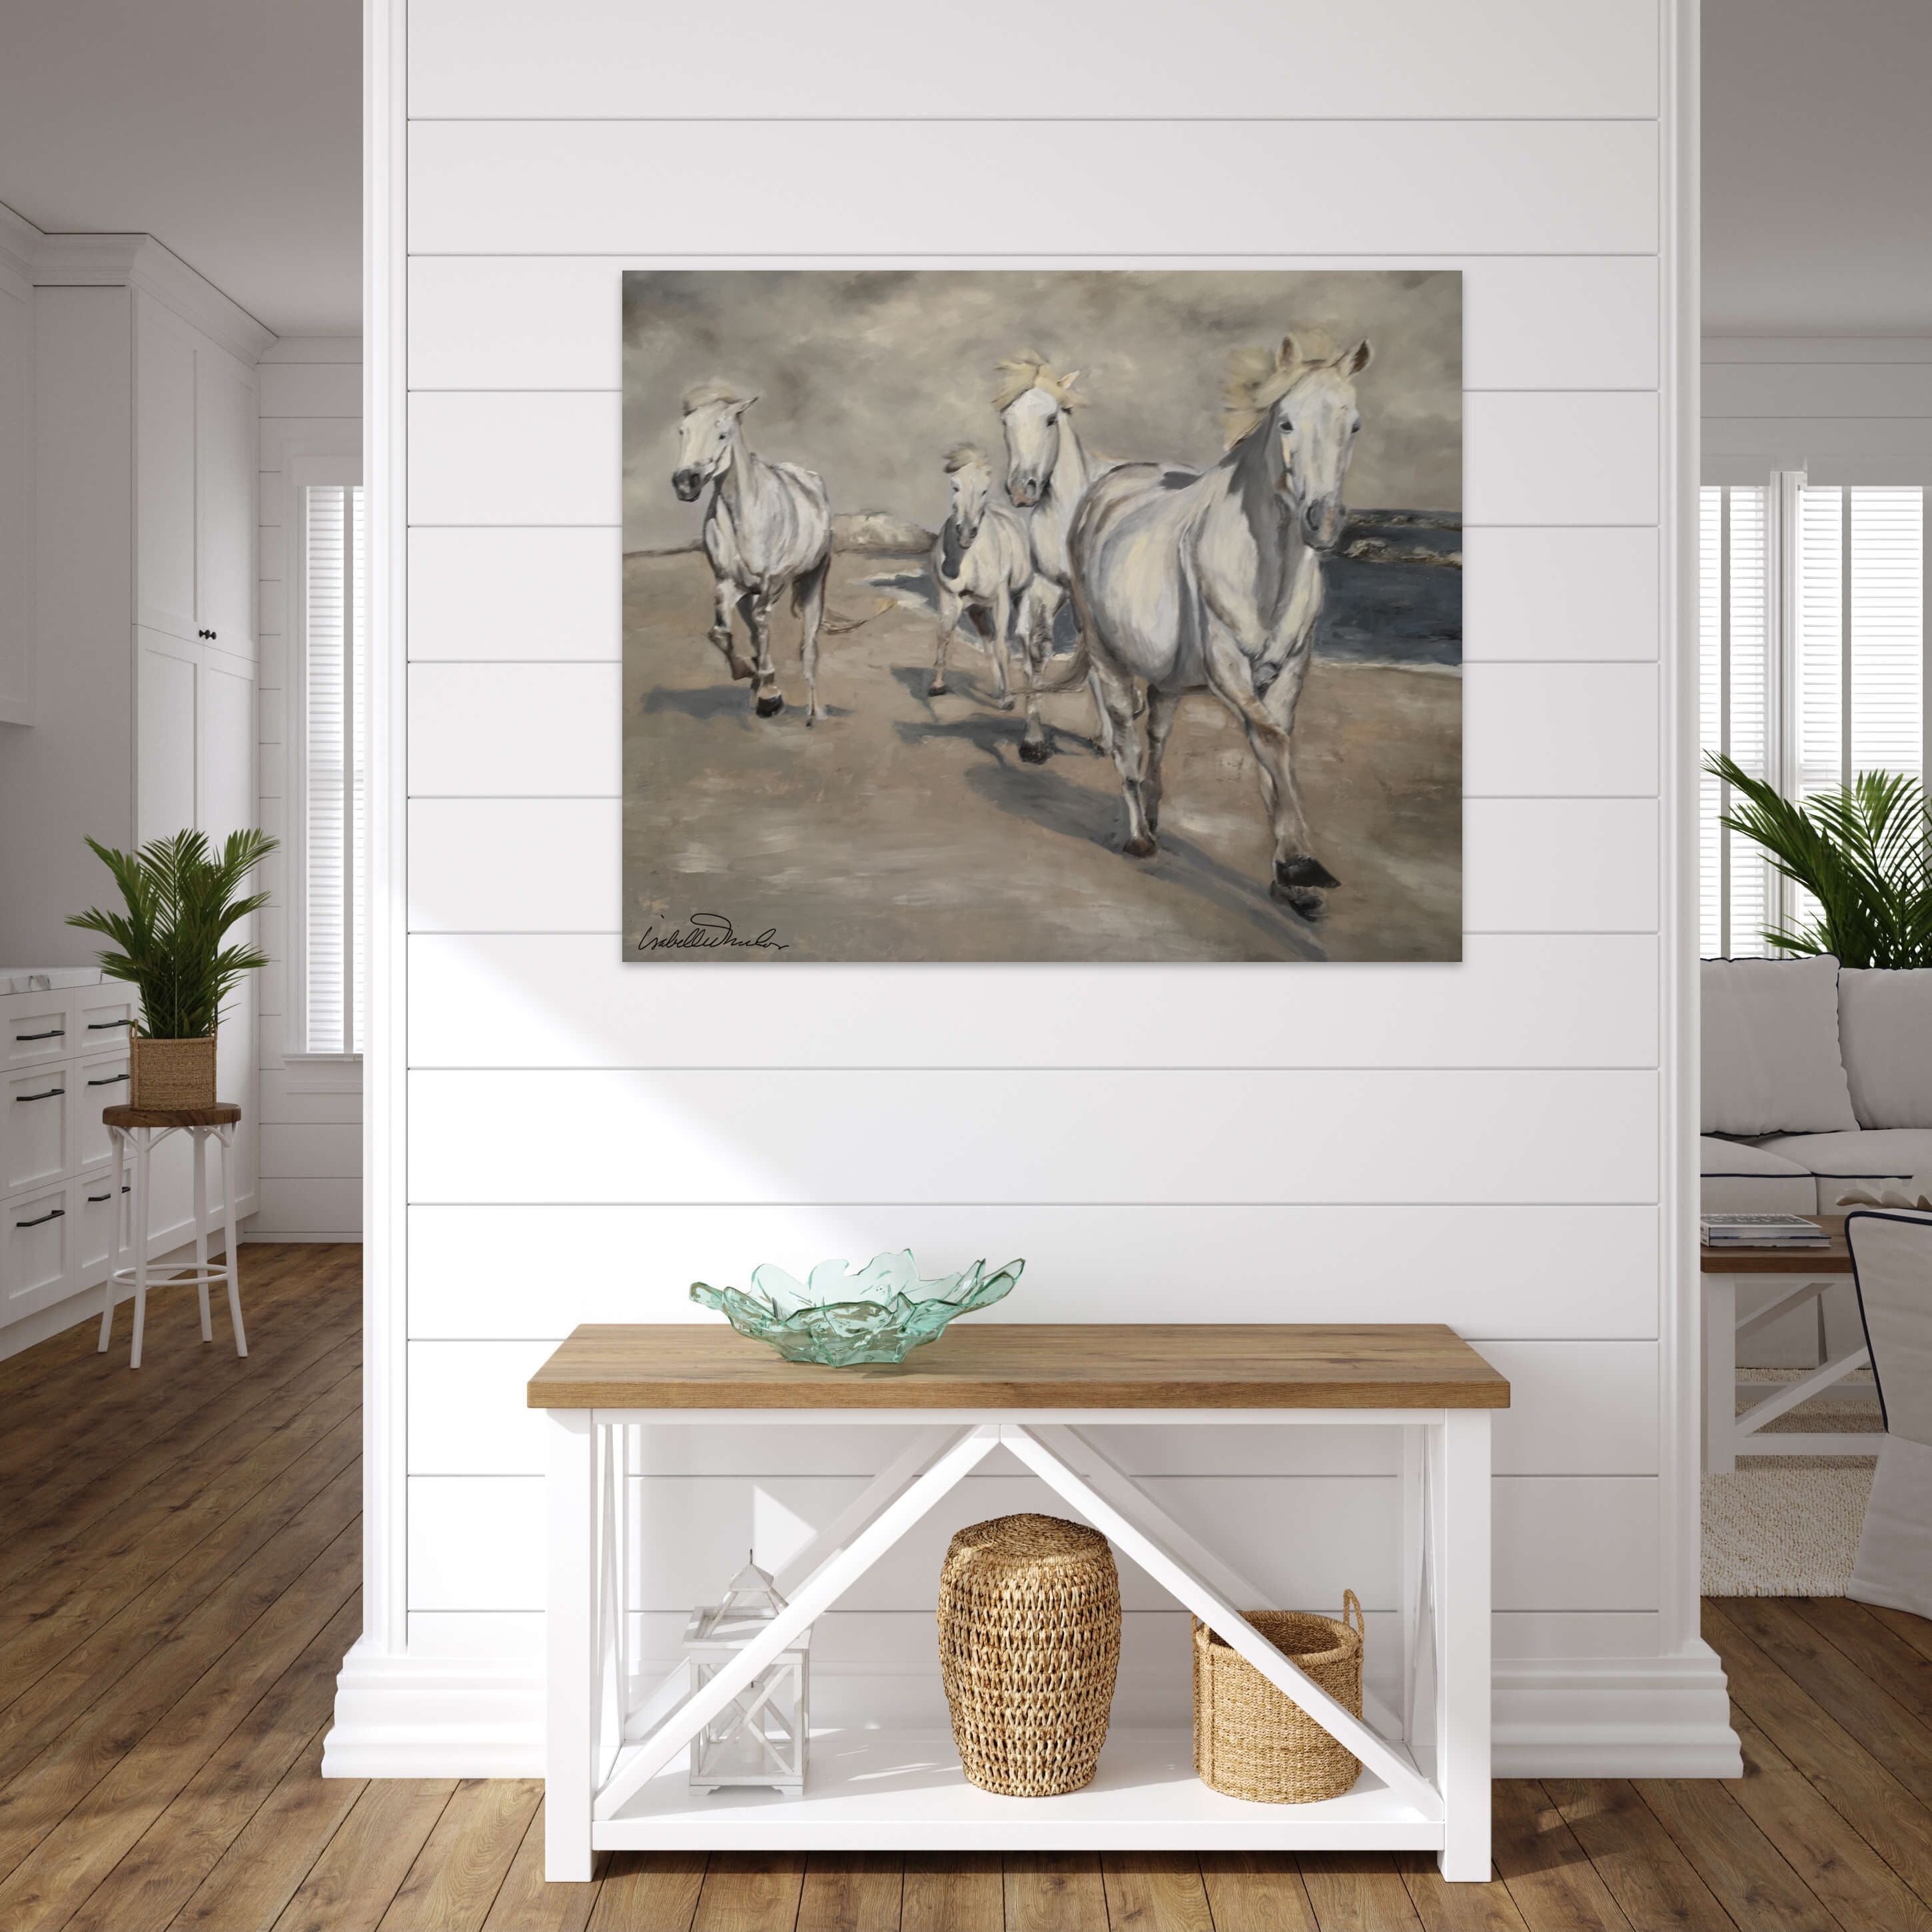 Galloping on the Camargue Seashore, retouched original canvas print